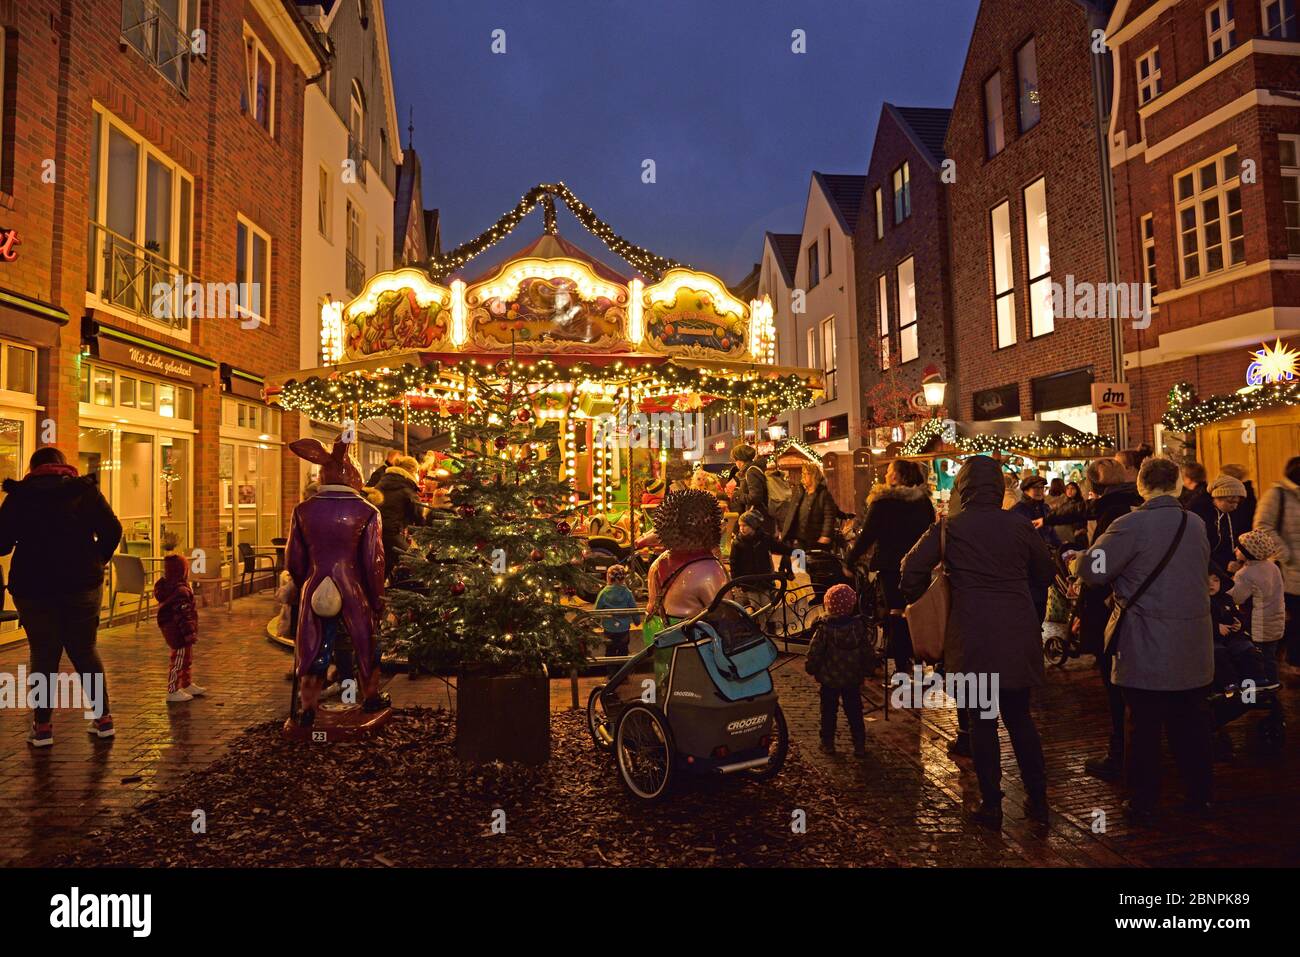 Europe, Germany, Lower Saxony, Buxtehude, Hamburg Metropolitan Region, Christmas market in front of the town hall, Stock Photo